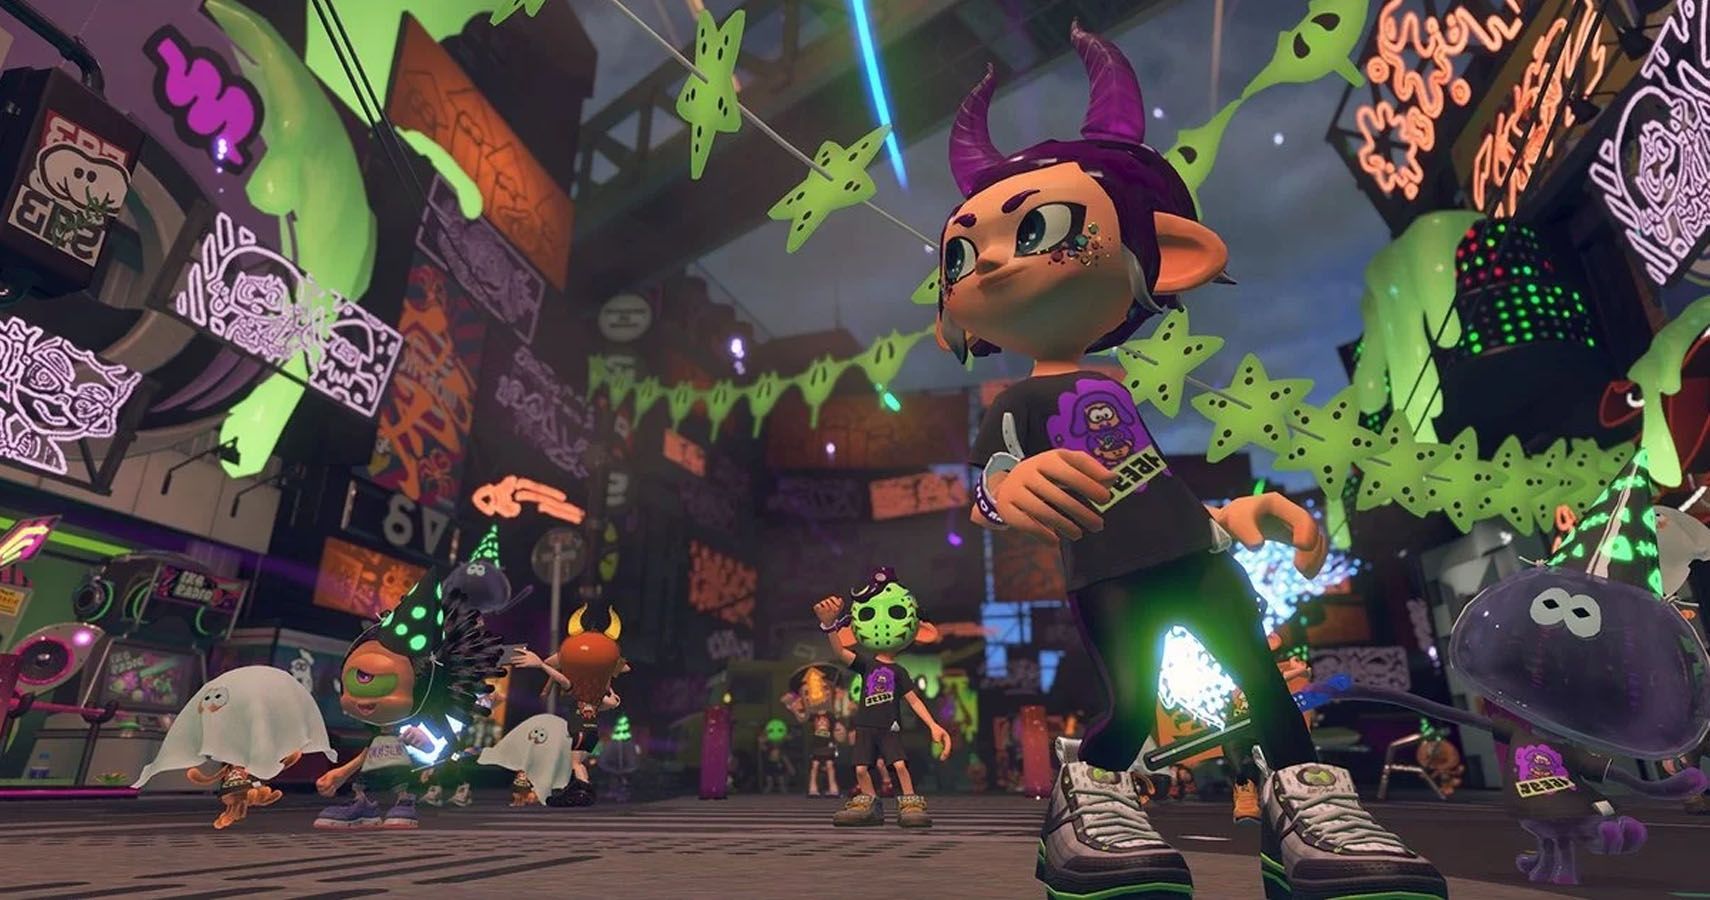 Splatoon 2 Is Going All The Way For Halloween Spooky Splatfest And Splatoween Party Incoming